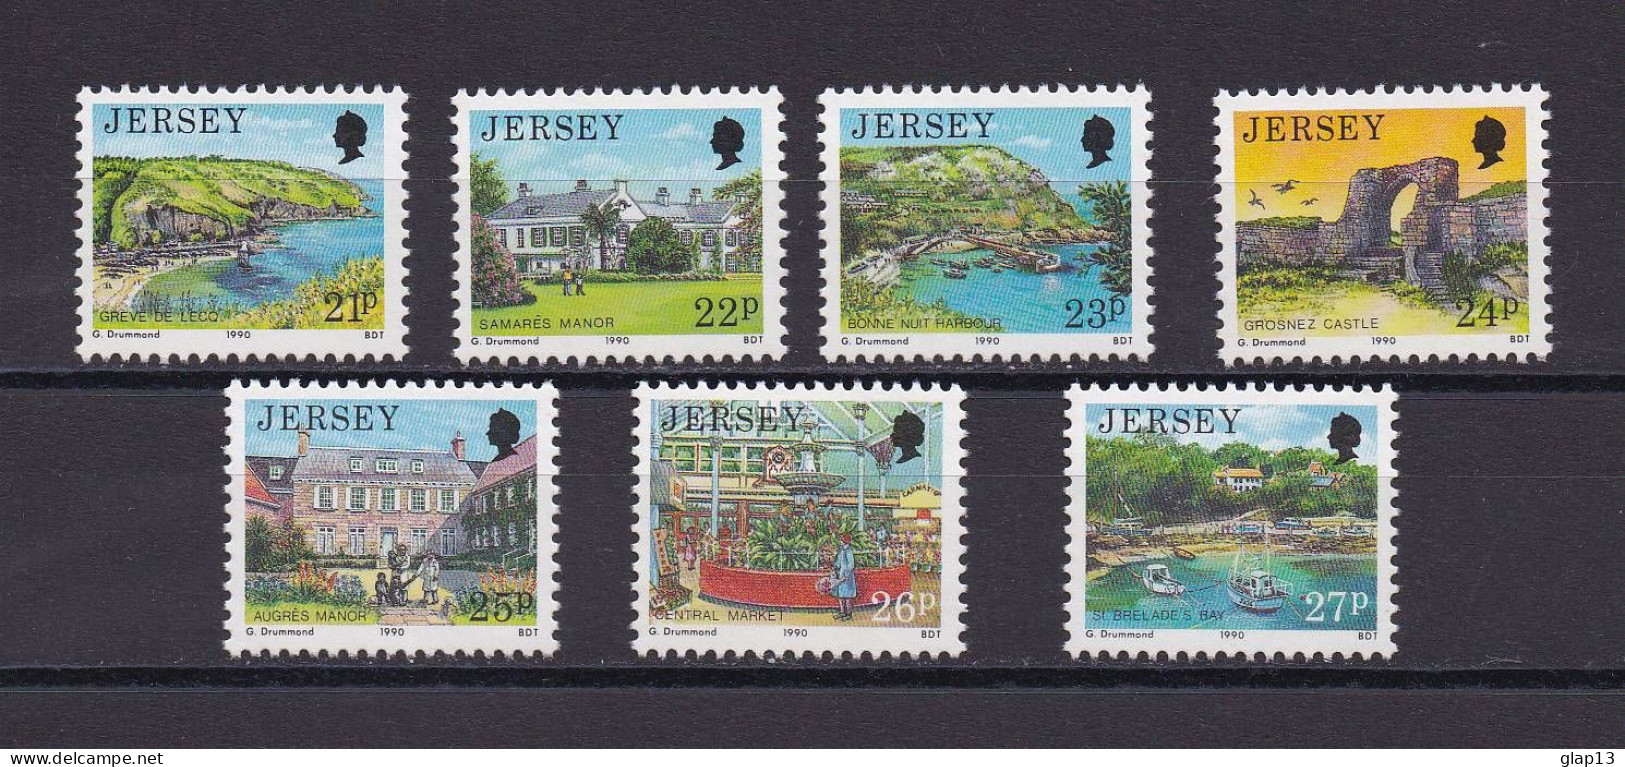 JERSEY 1990 TIMBRE N°495/01 NEUF** VUES - Jersey